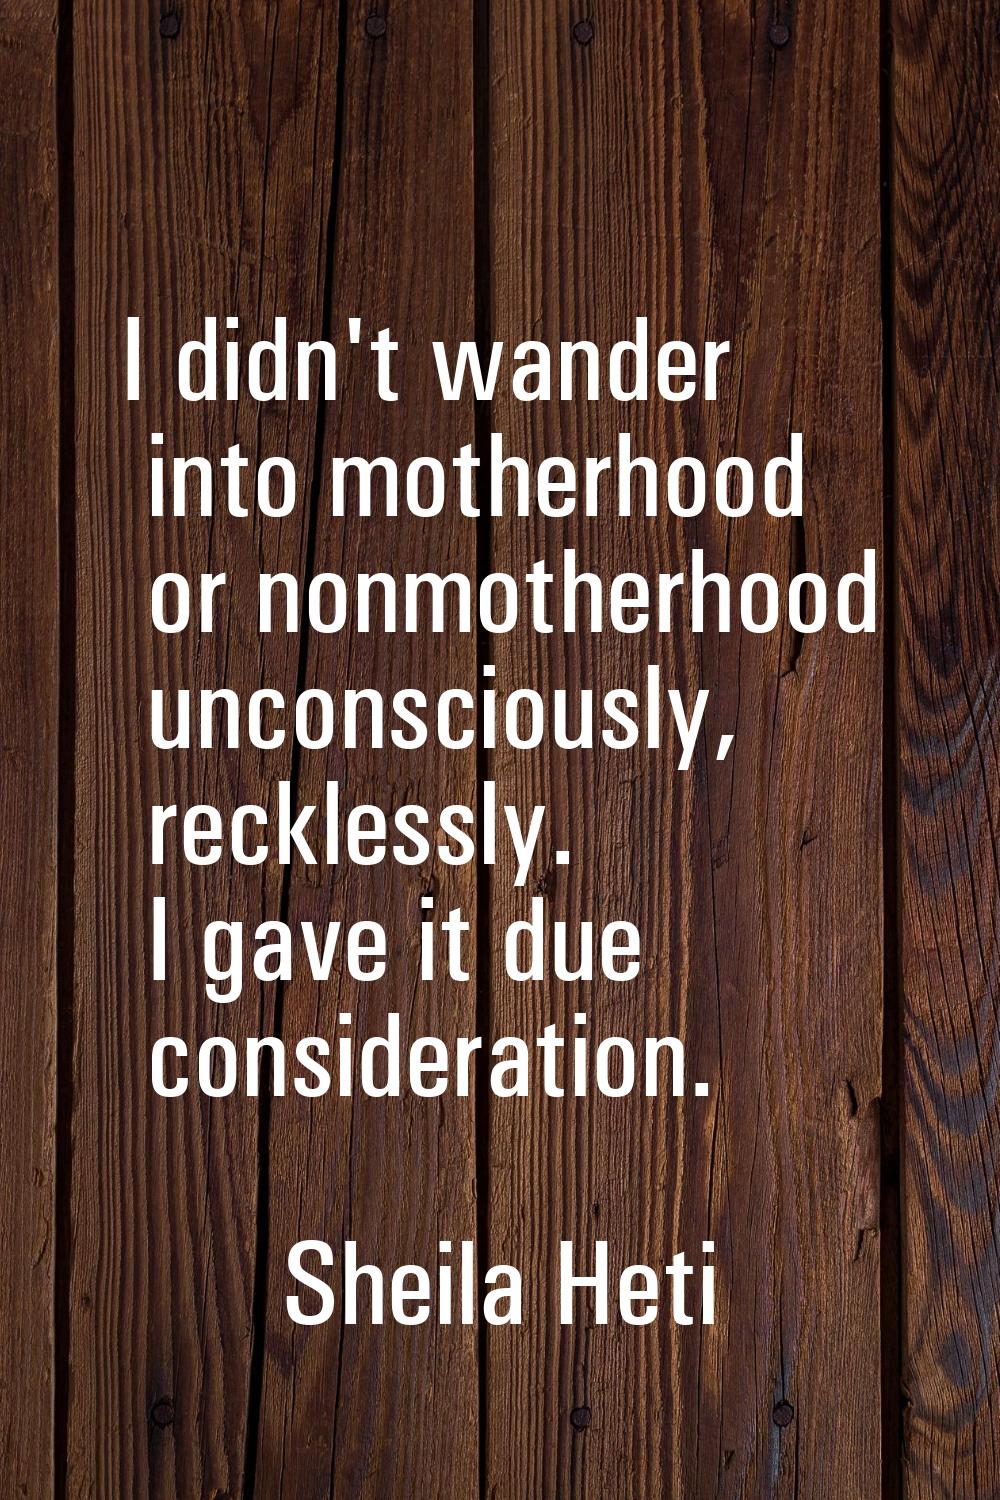 I didn't wander into motherhood or nonmotherhood unconsciously, recklessly. I gave it due considera